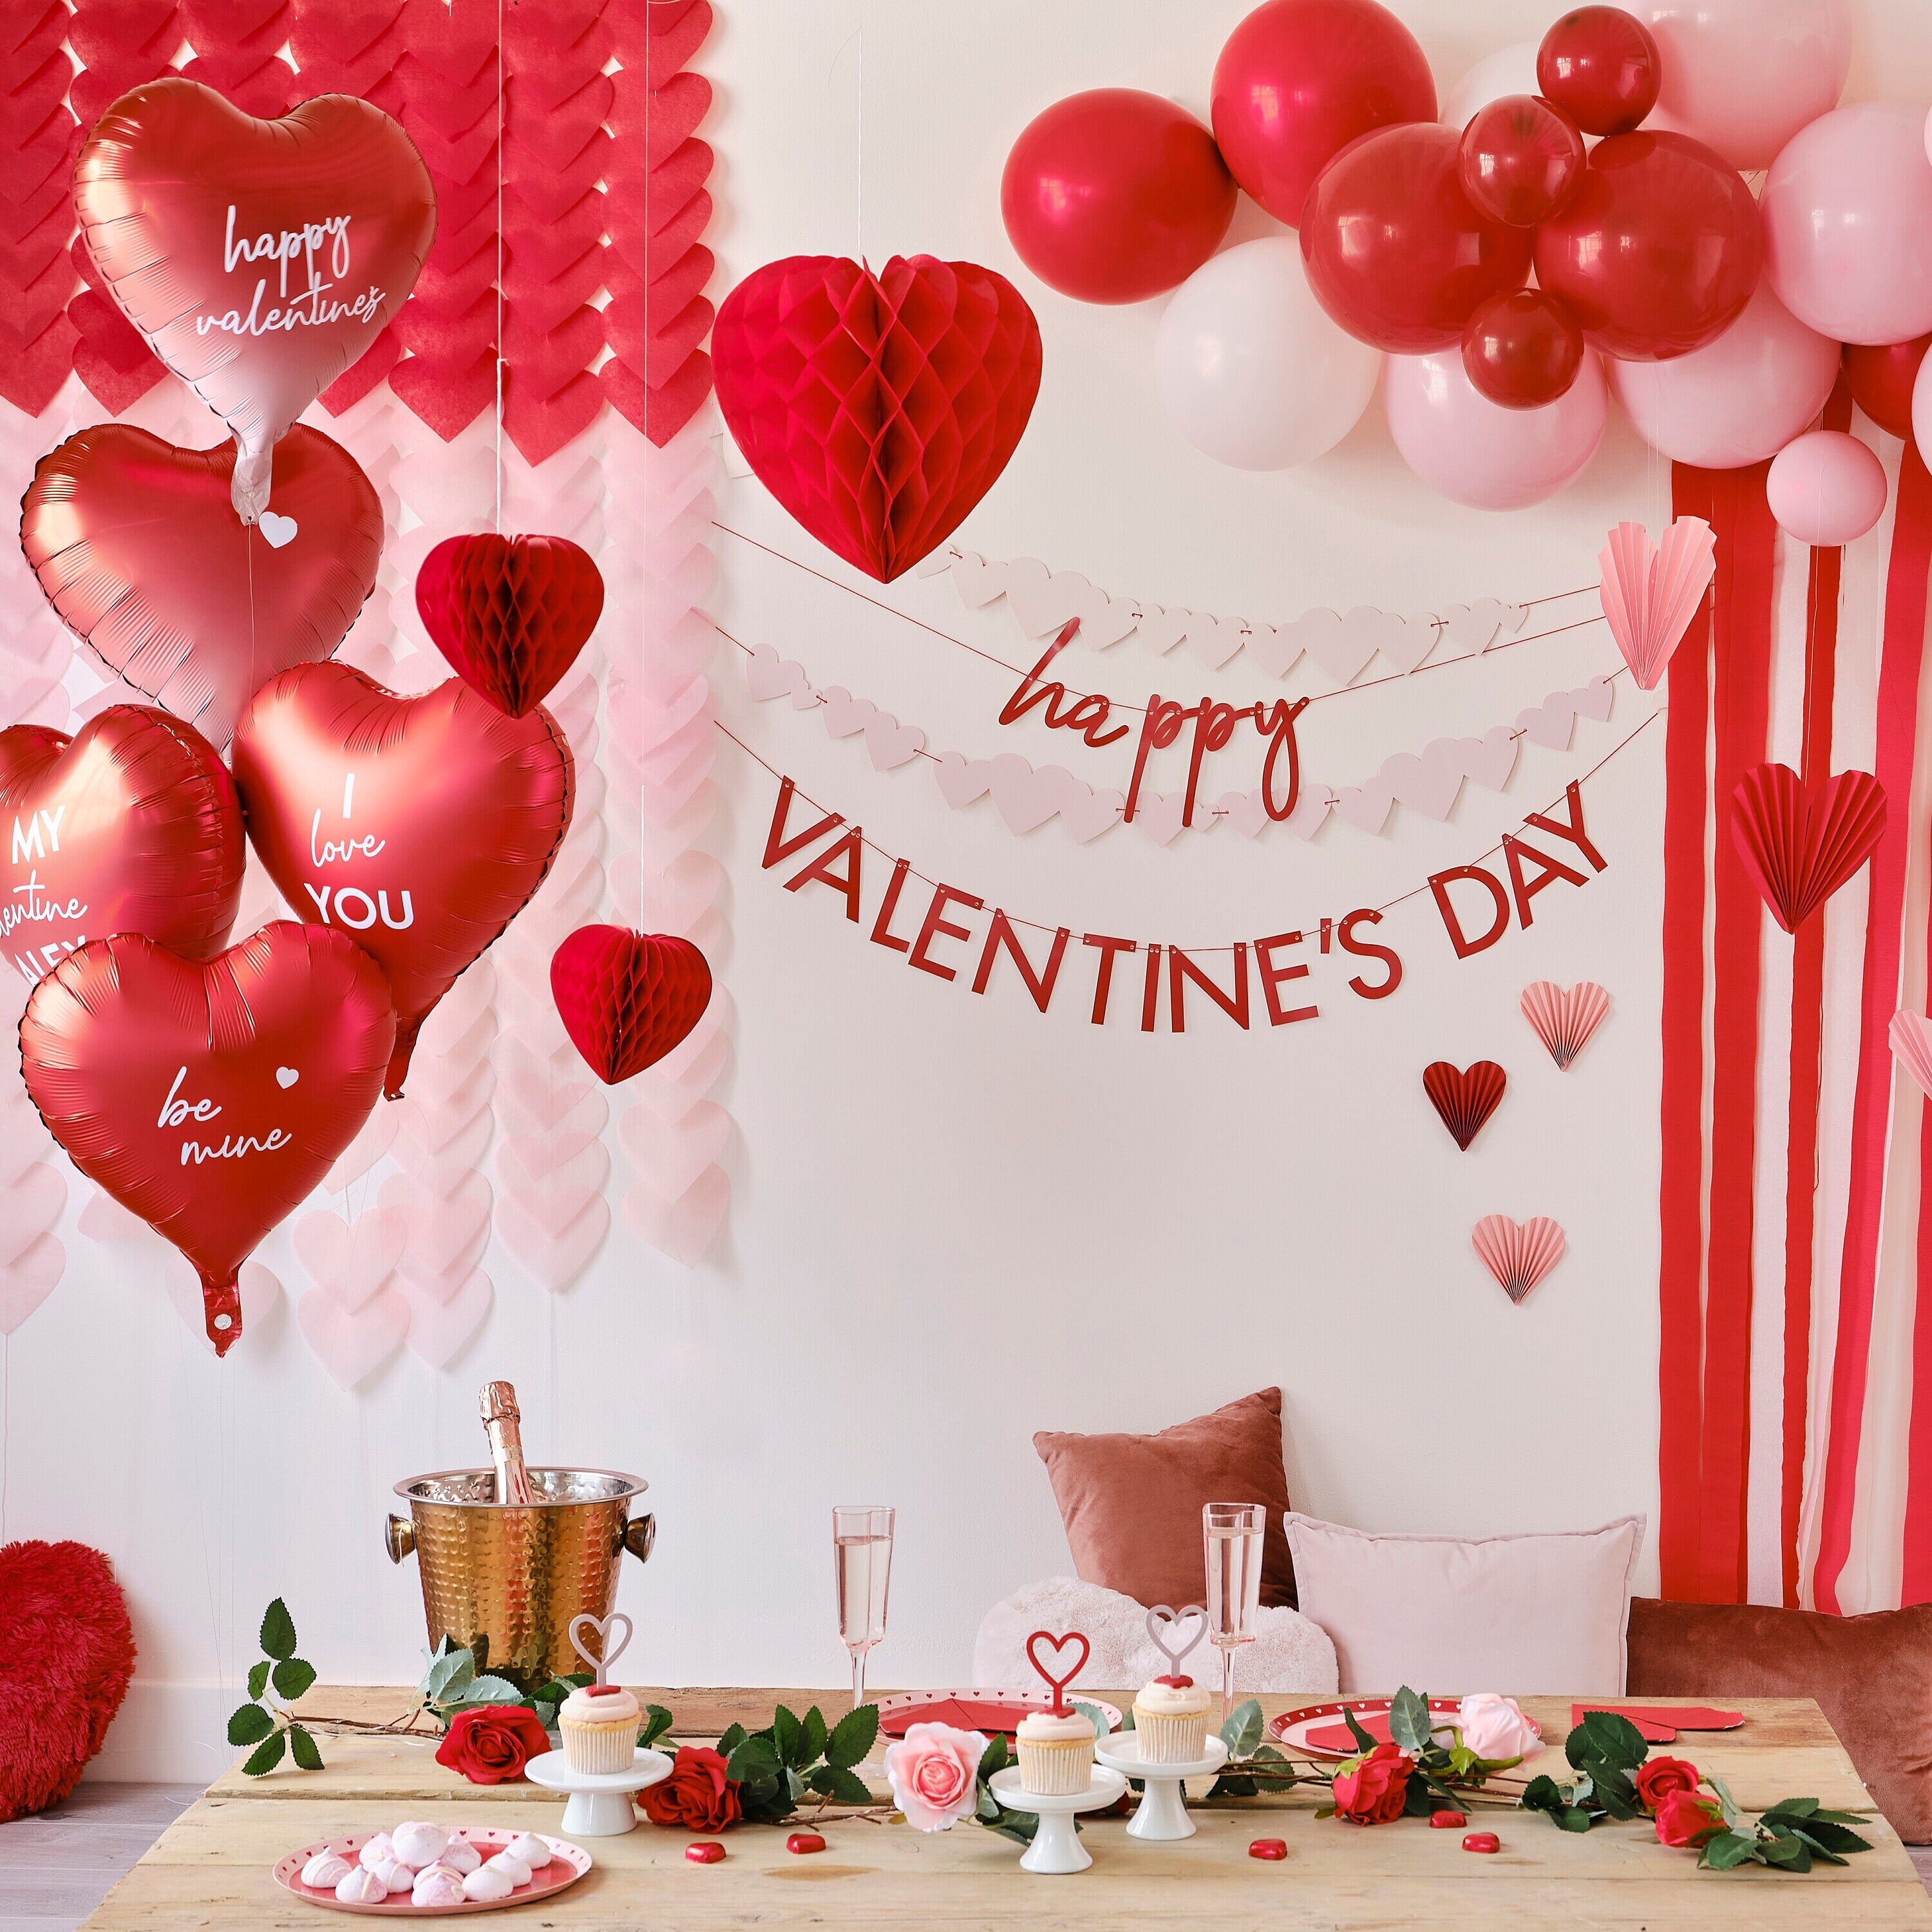 23 Outdoor Valentine's Day Décor Ideas to Spread a Little Extra Love